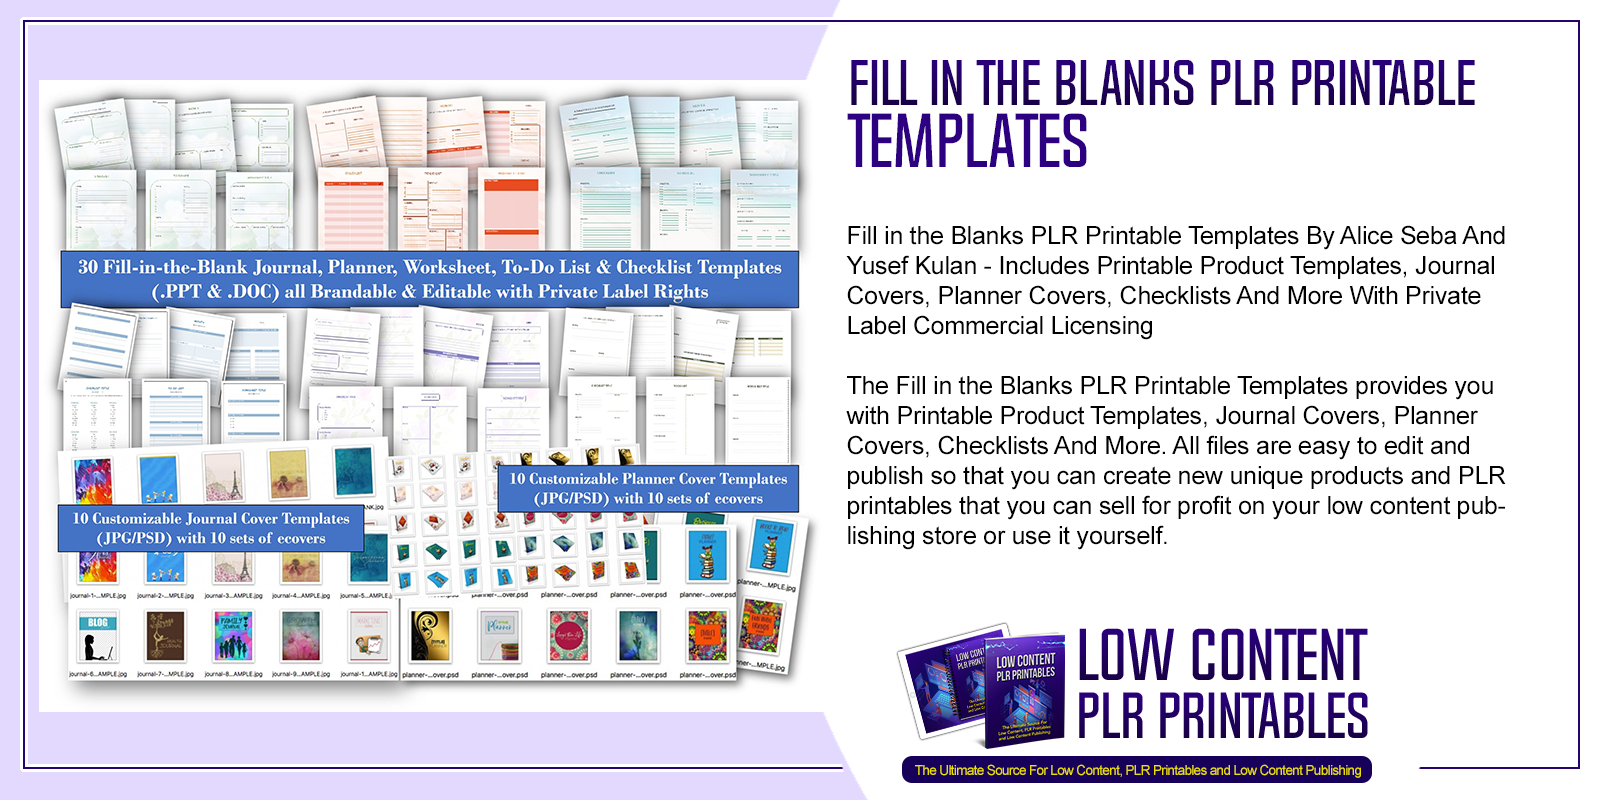 Fill in the Blanks PLR Printable Templates